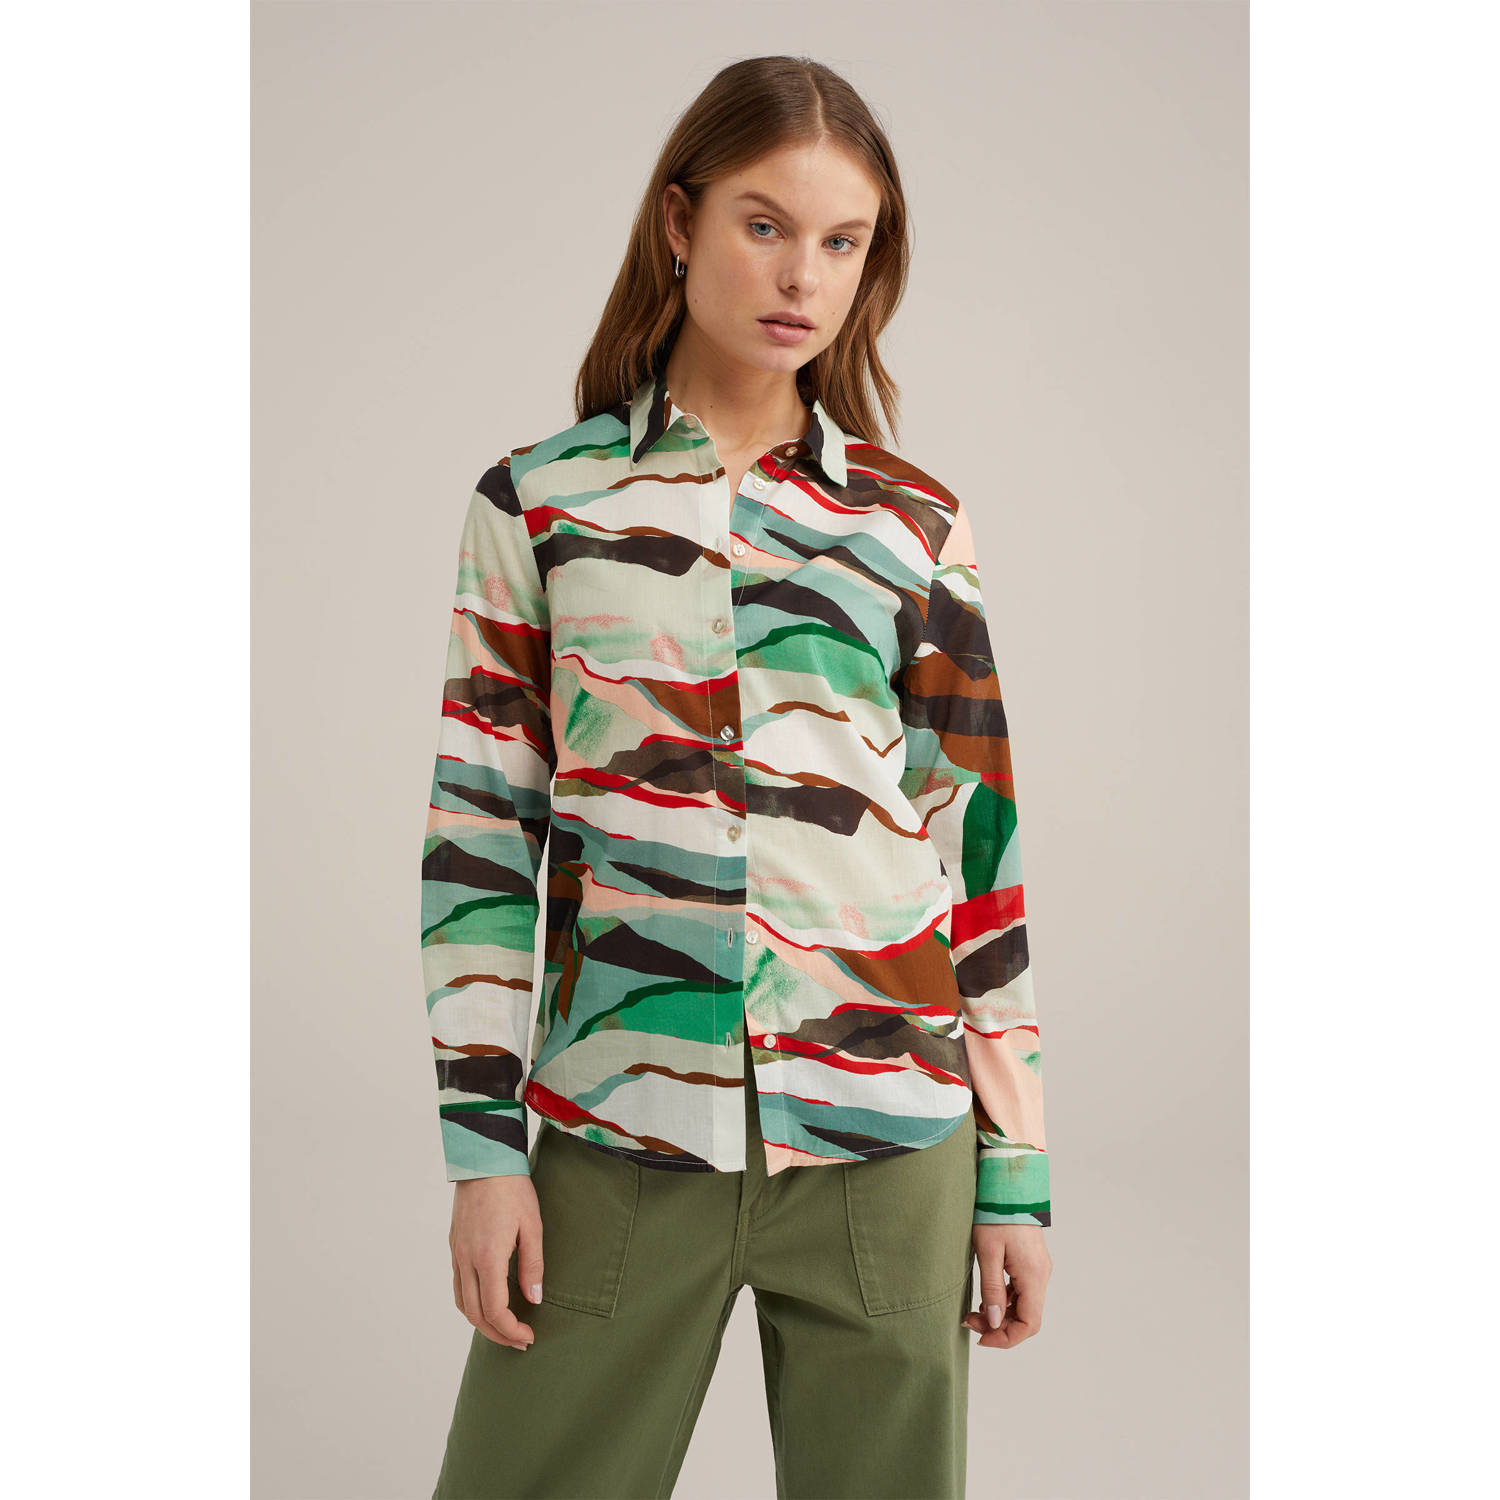 WE Fashion blouse met all over print groen bruin rood